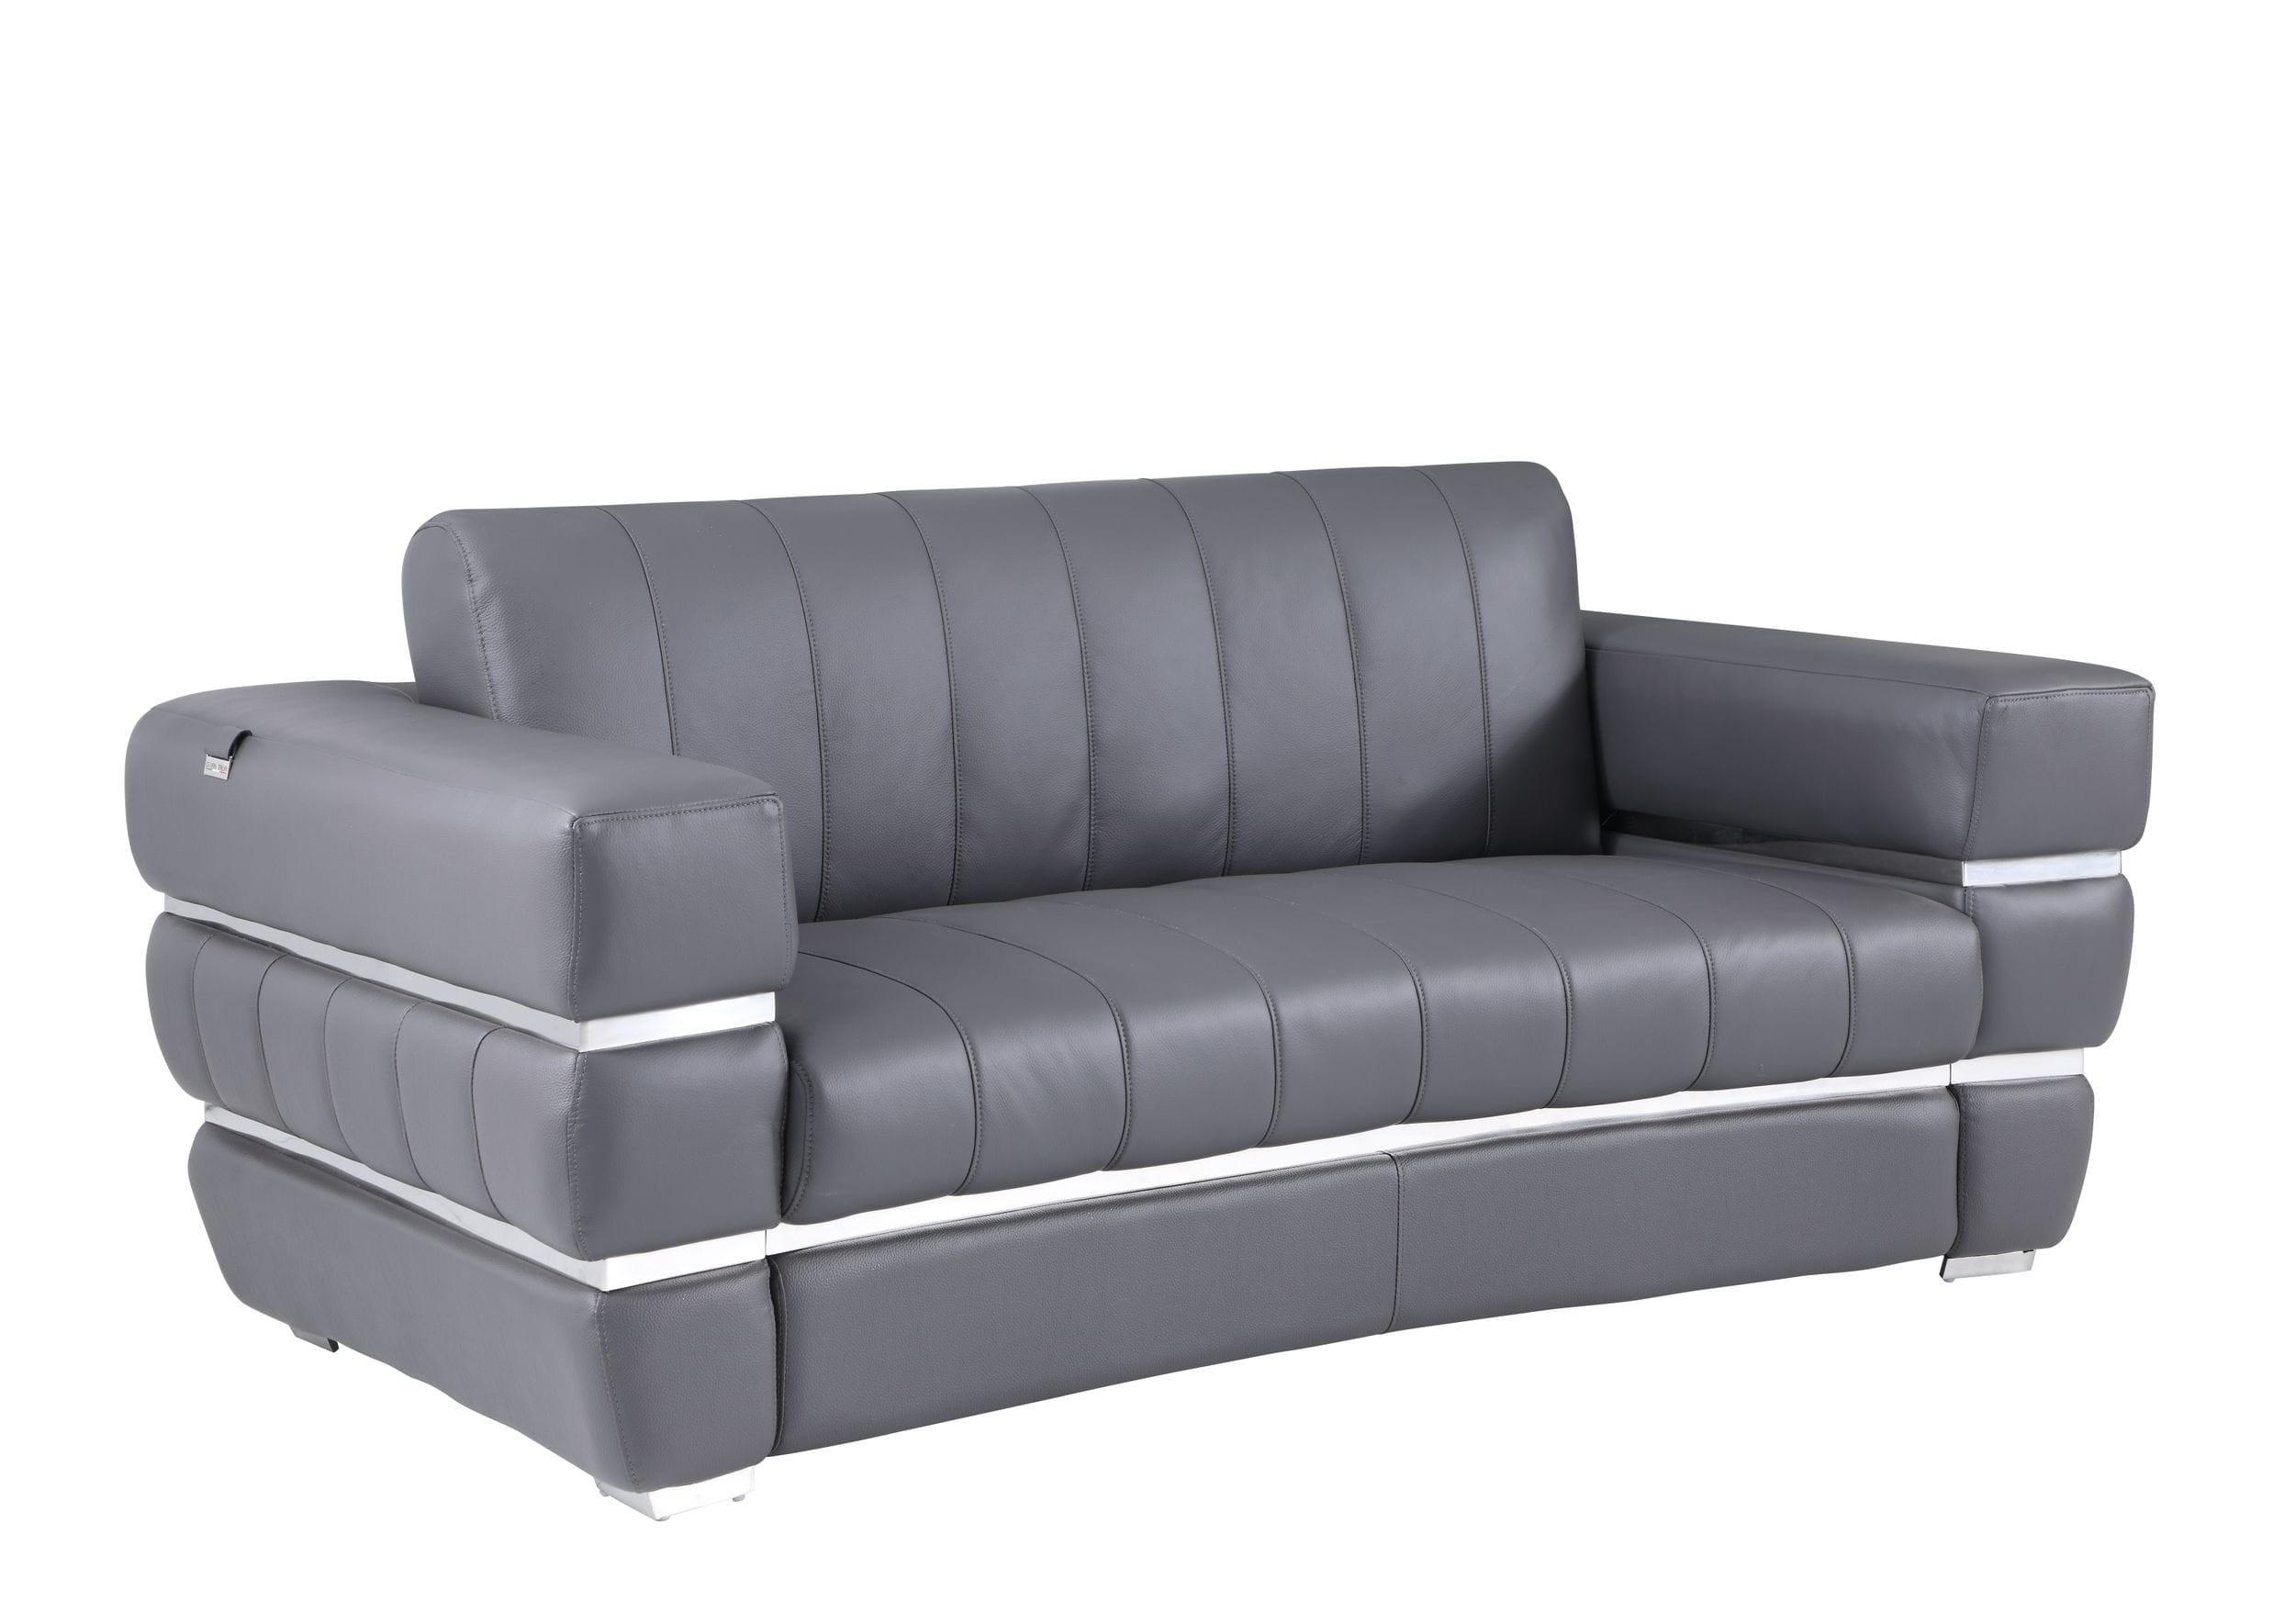 Contemporary Loveseat 904 904-DK_GRAY-L in Gray Leather